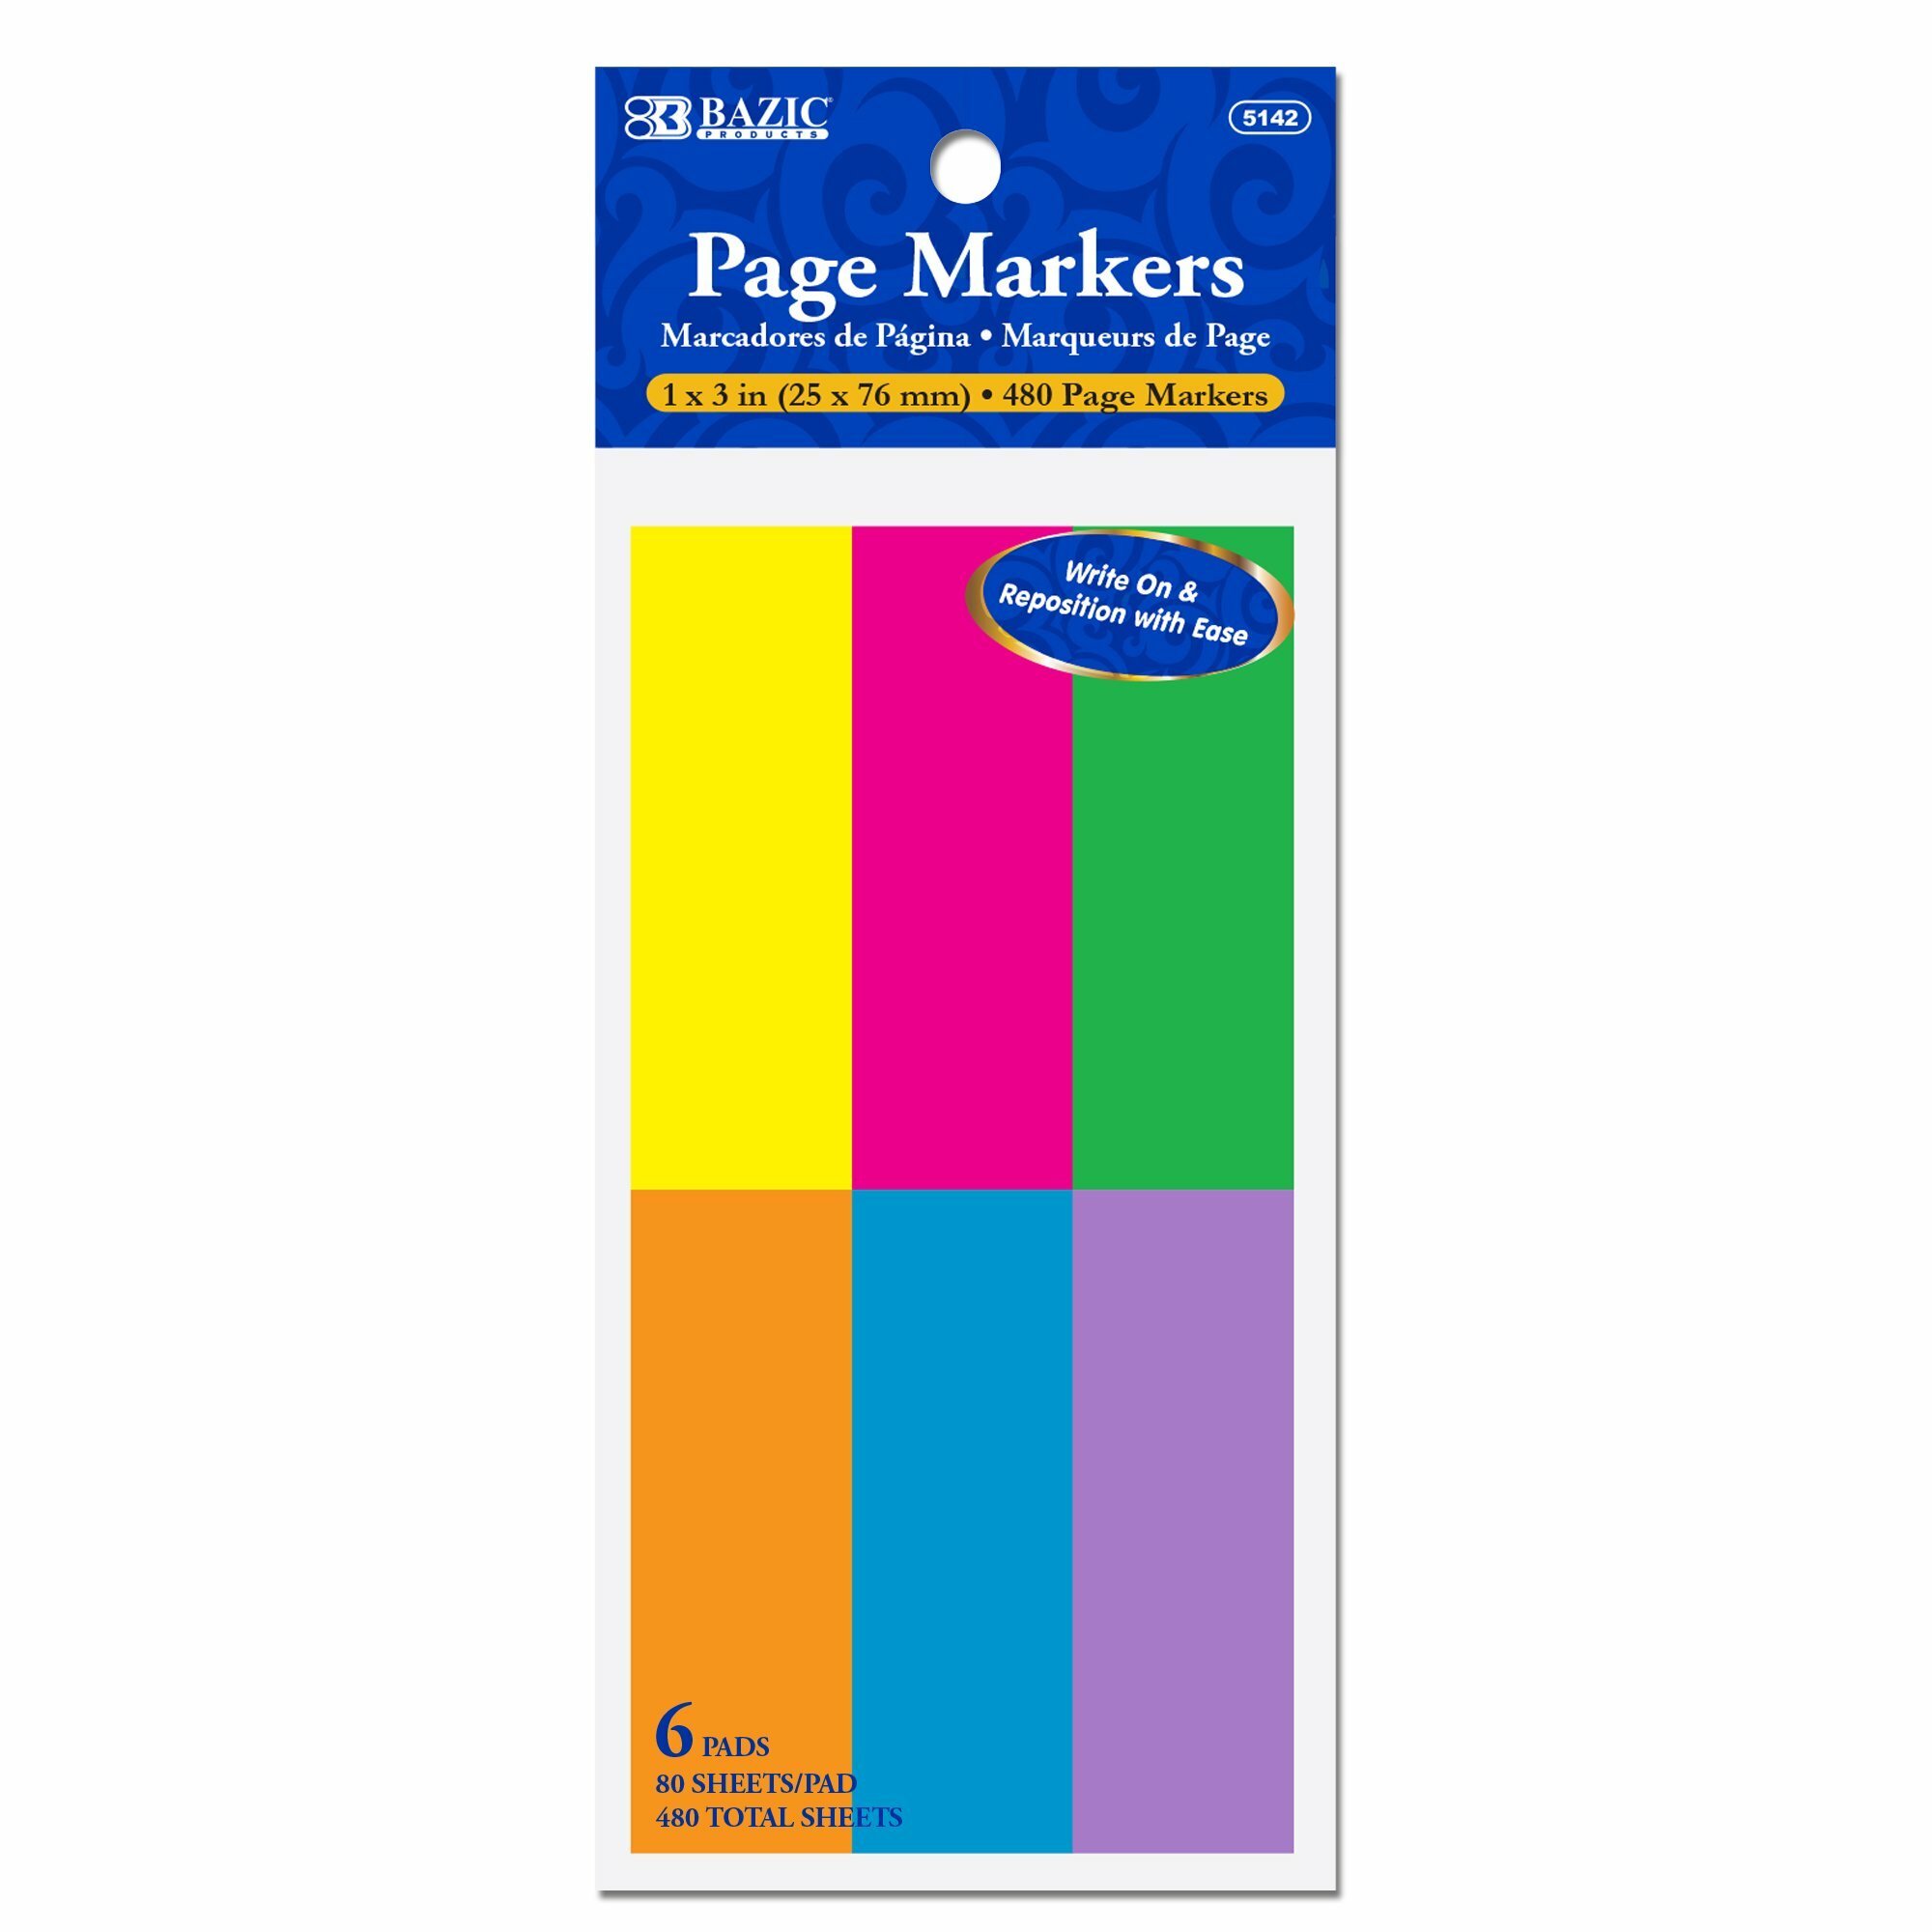 Page Markers (BAZ 5142)